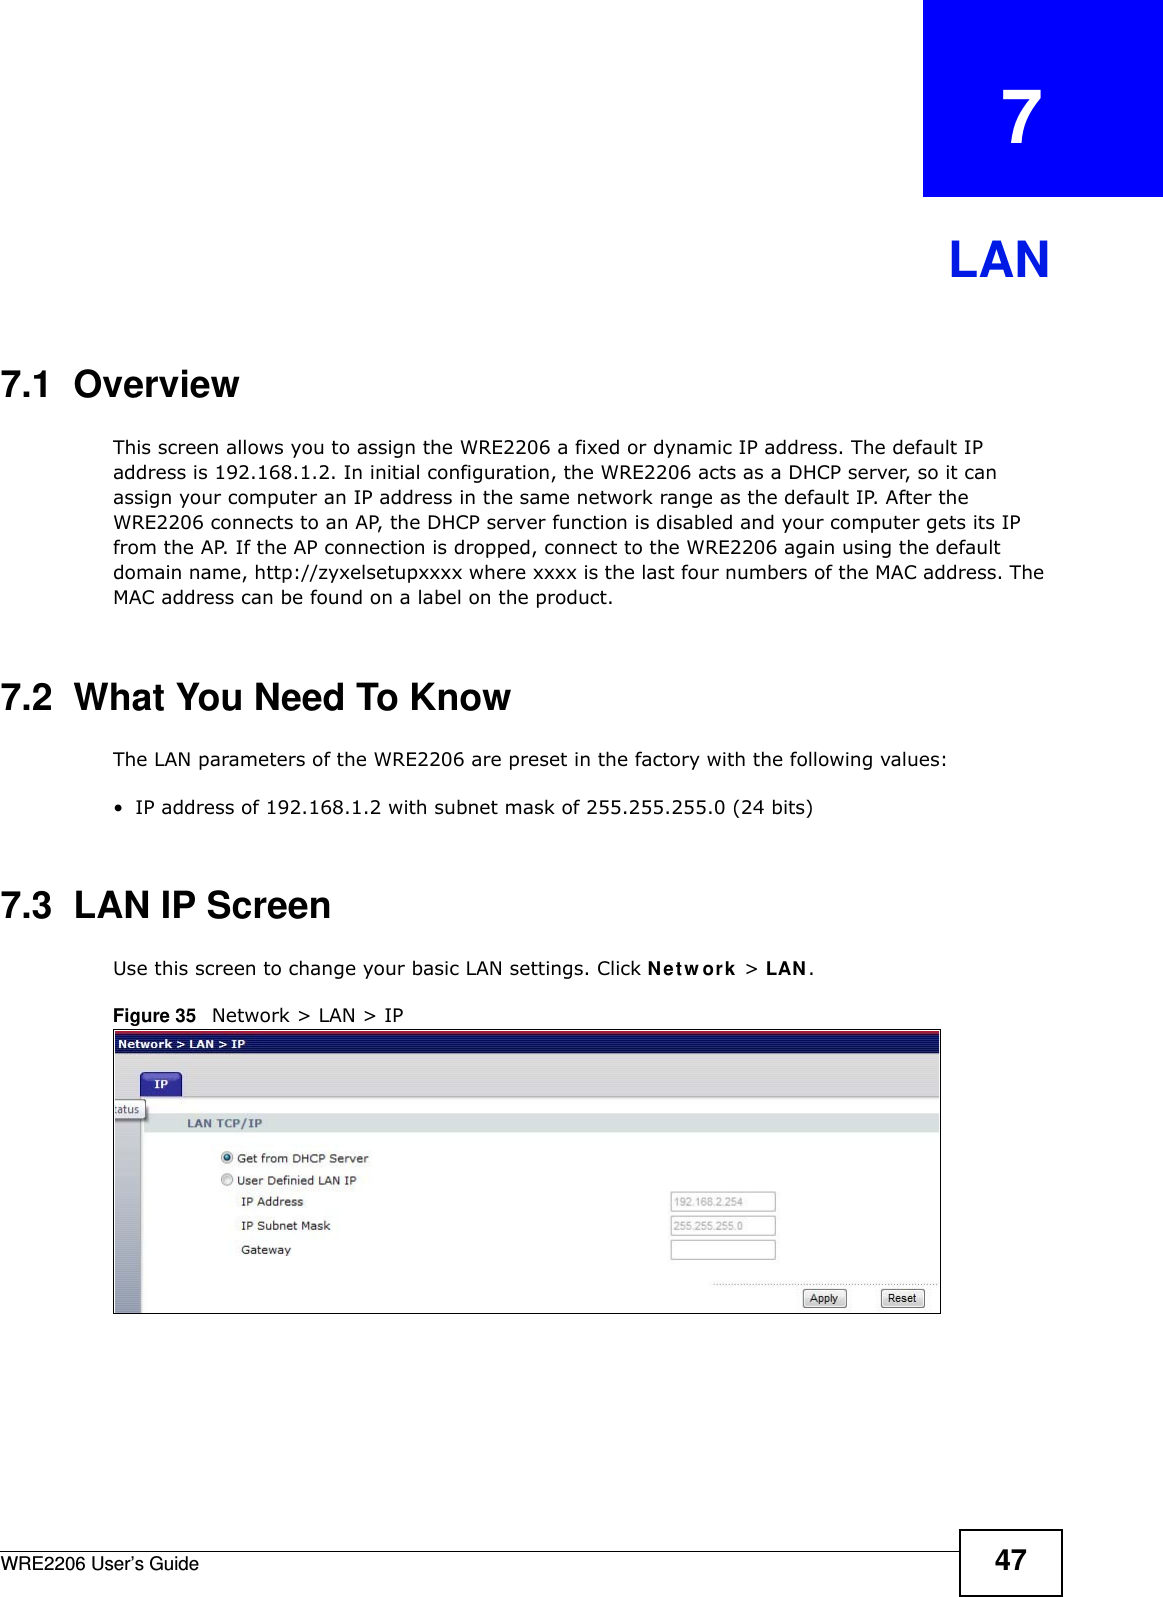 WRE2206 User’s Guide 47CHAPTER   7LAN7.1  OverviewThis screen allows you to assign the WRE2206 a fixed or dynamic IP address. The default IP address is 192.168.1.2. In initial configuration, the WRE2206 acts as a DHCP server, so it can assign your computer an IP address in the same network range as the default IP. After the WRE2206 connects to an AP, the DHCP server function is disabled and your computer gets its IP from the AP. If the AP connection is dropped, connect to the WRE2206 again using the default domain name, http://zyxelsetupxxxx where xxxx is the last four numbers of the MAC address. The MAC address can be found on a label on the product.7.2  What You Need To KnowThe LAN parameters of the WRE2206 are preset in the factory with the following values:• IP address of 192.168.1.2 with subnet mask of 255.255.255.0 (24 bits)7.3  LAN IP ScreenUse this screen to change your basic LAN settings. Click N et w or k  &gt; LAN .Figure 35   Network &gt; LAN &gt; IP 